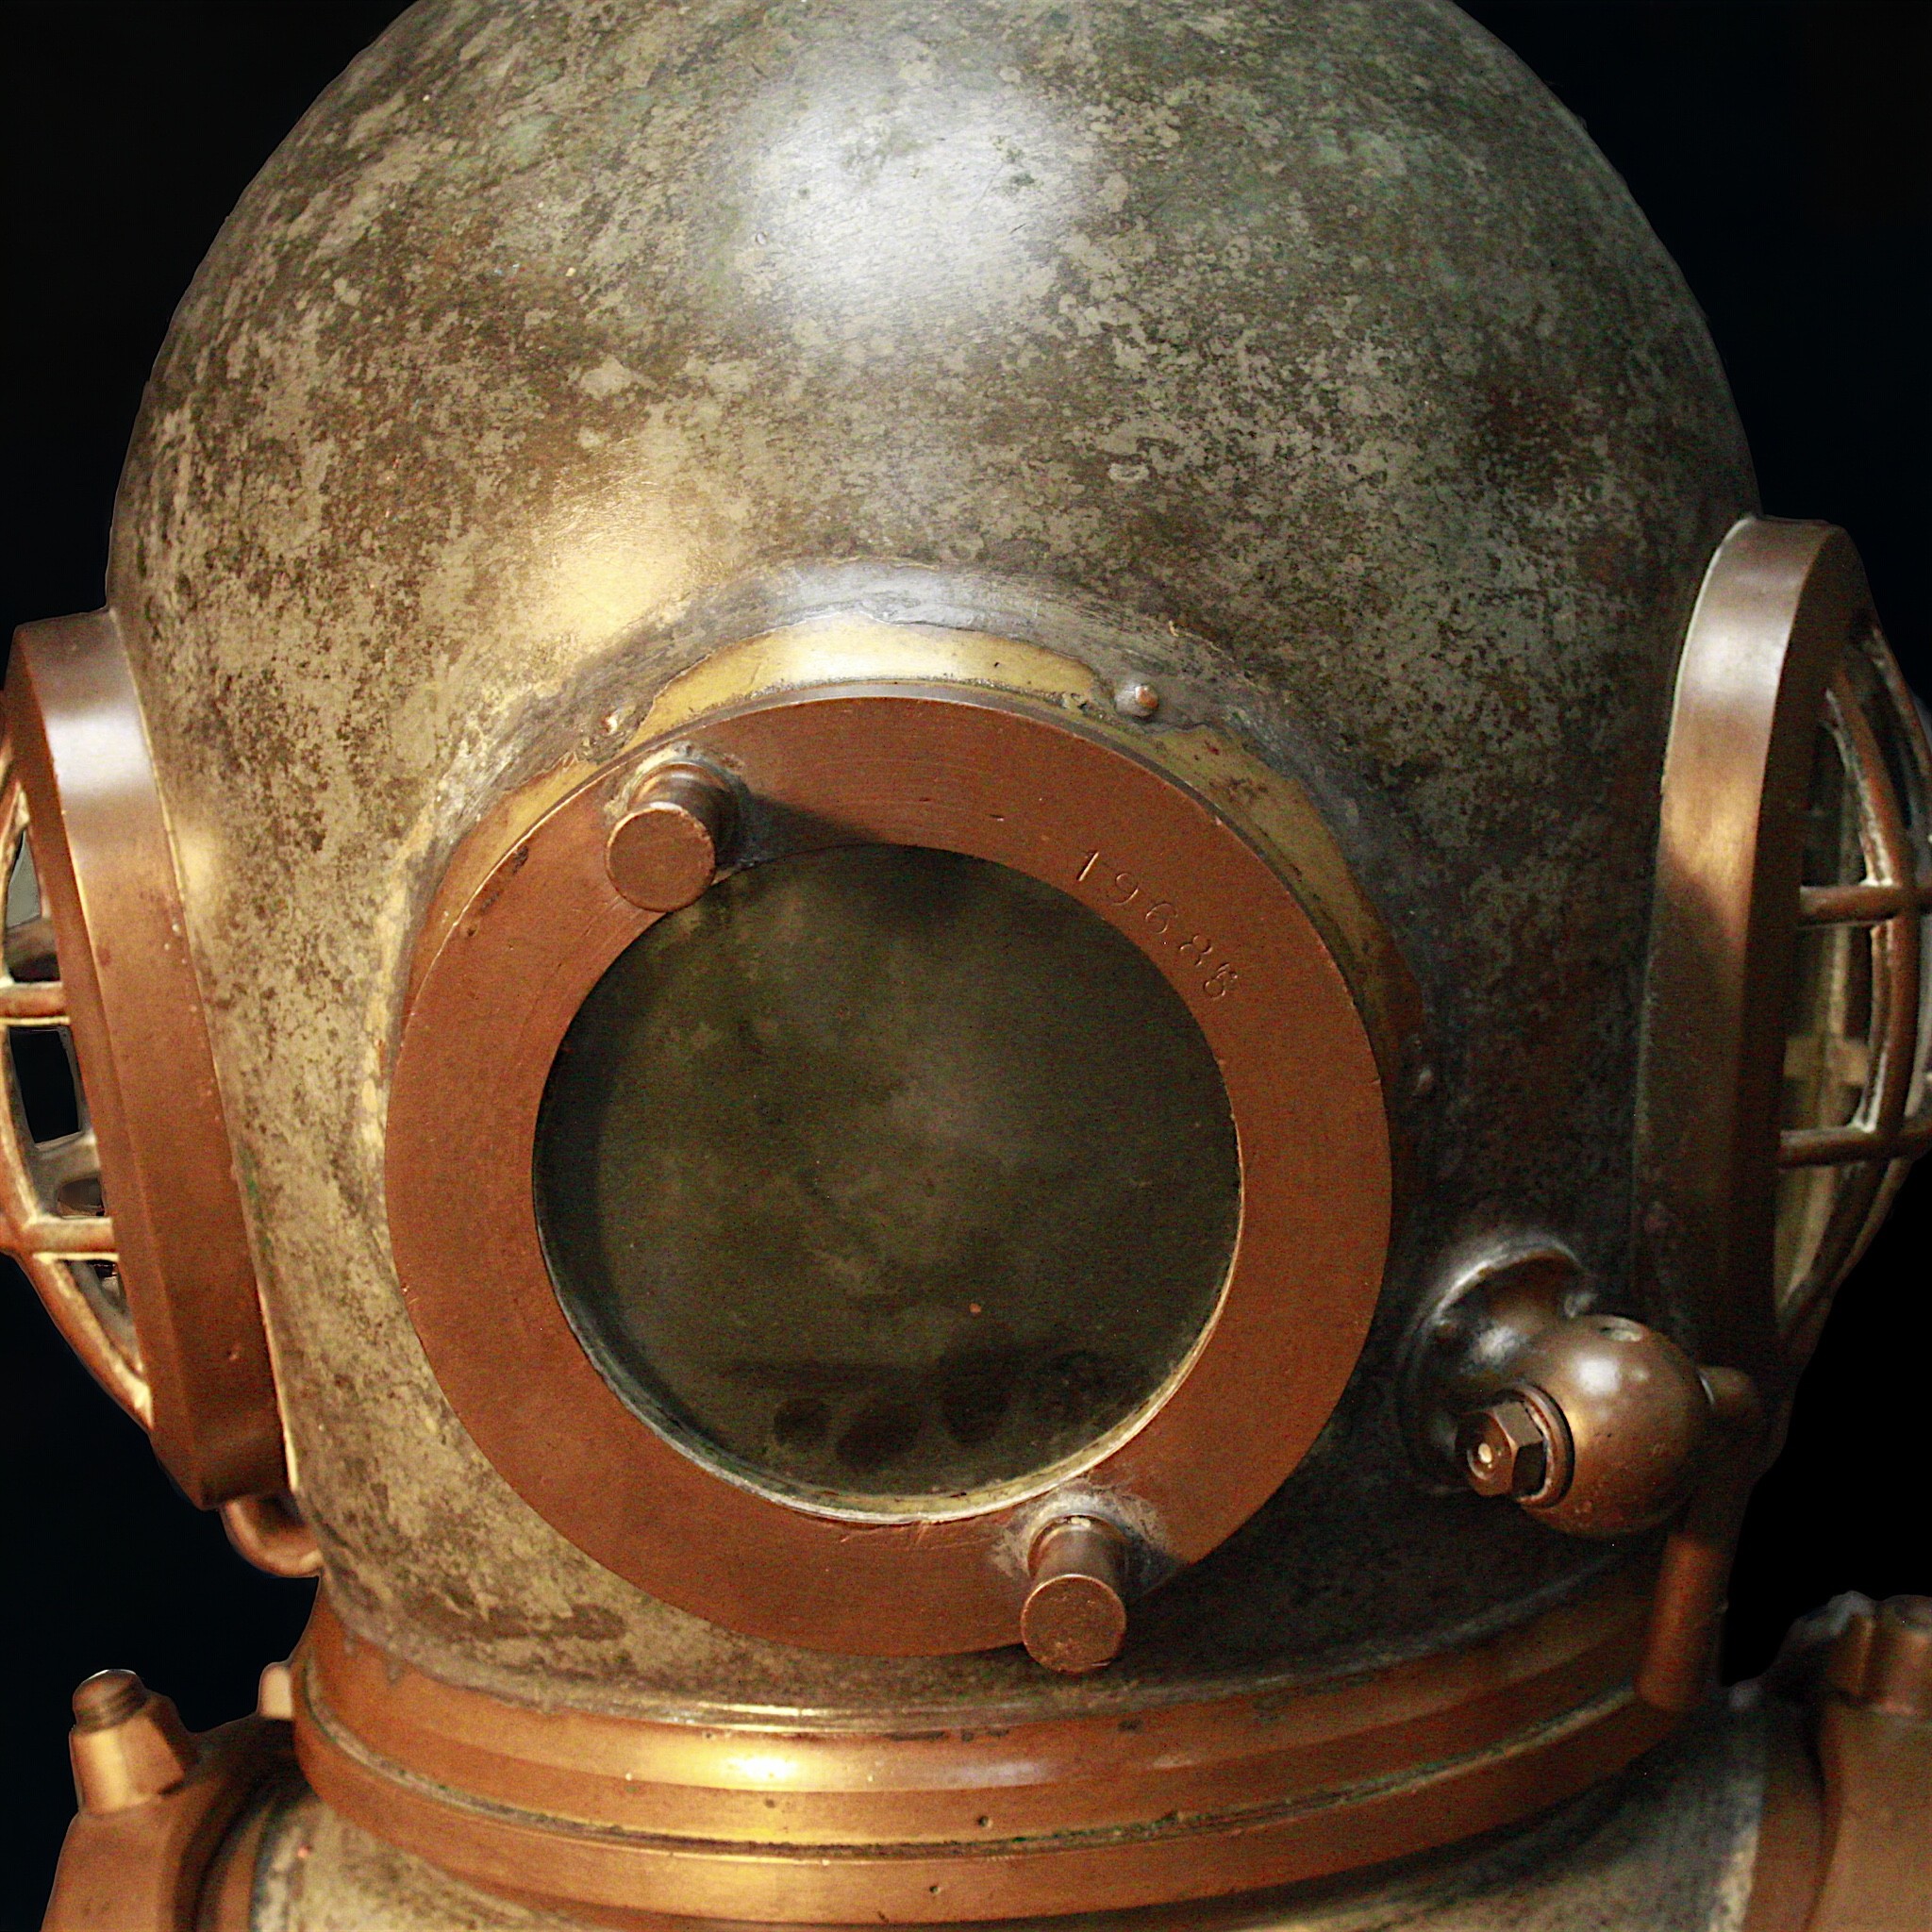 A FINE 12-BOLT DIVING HELMET BY SIEBE GORMAN, CIRCA 1950 numbered 19685 (matching on faceplate and - Image 4 of 7